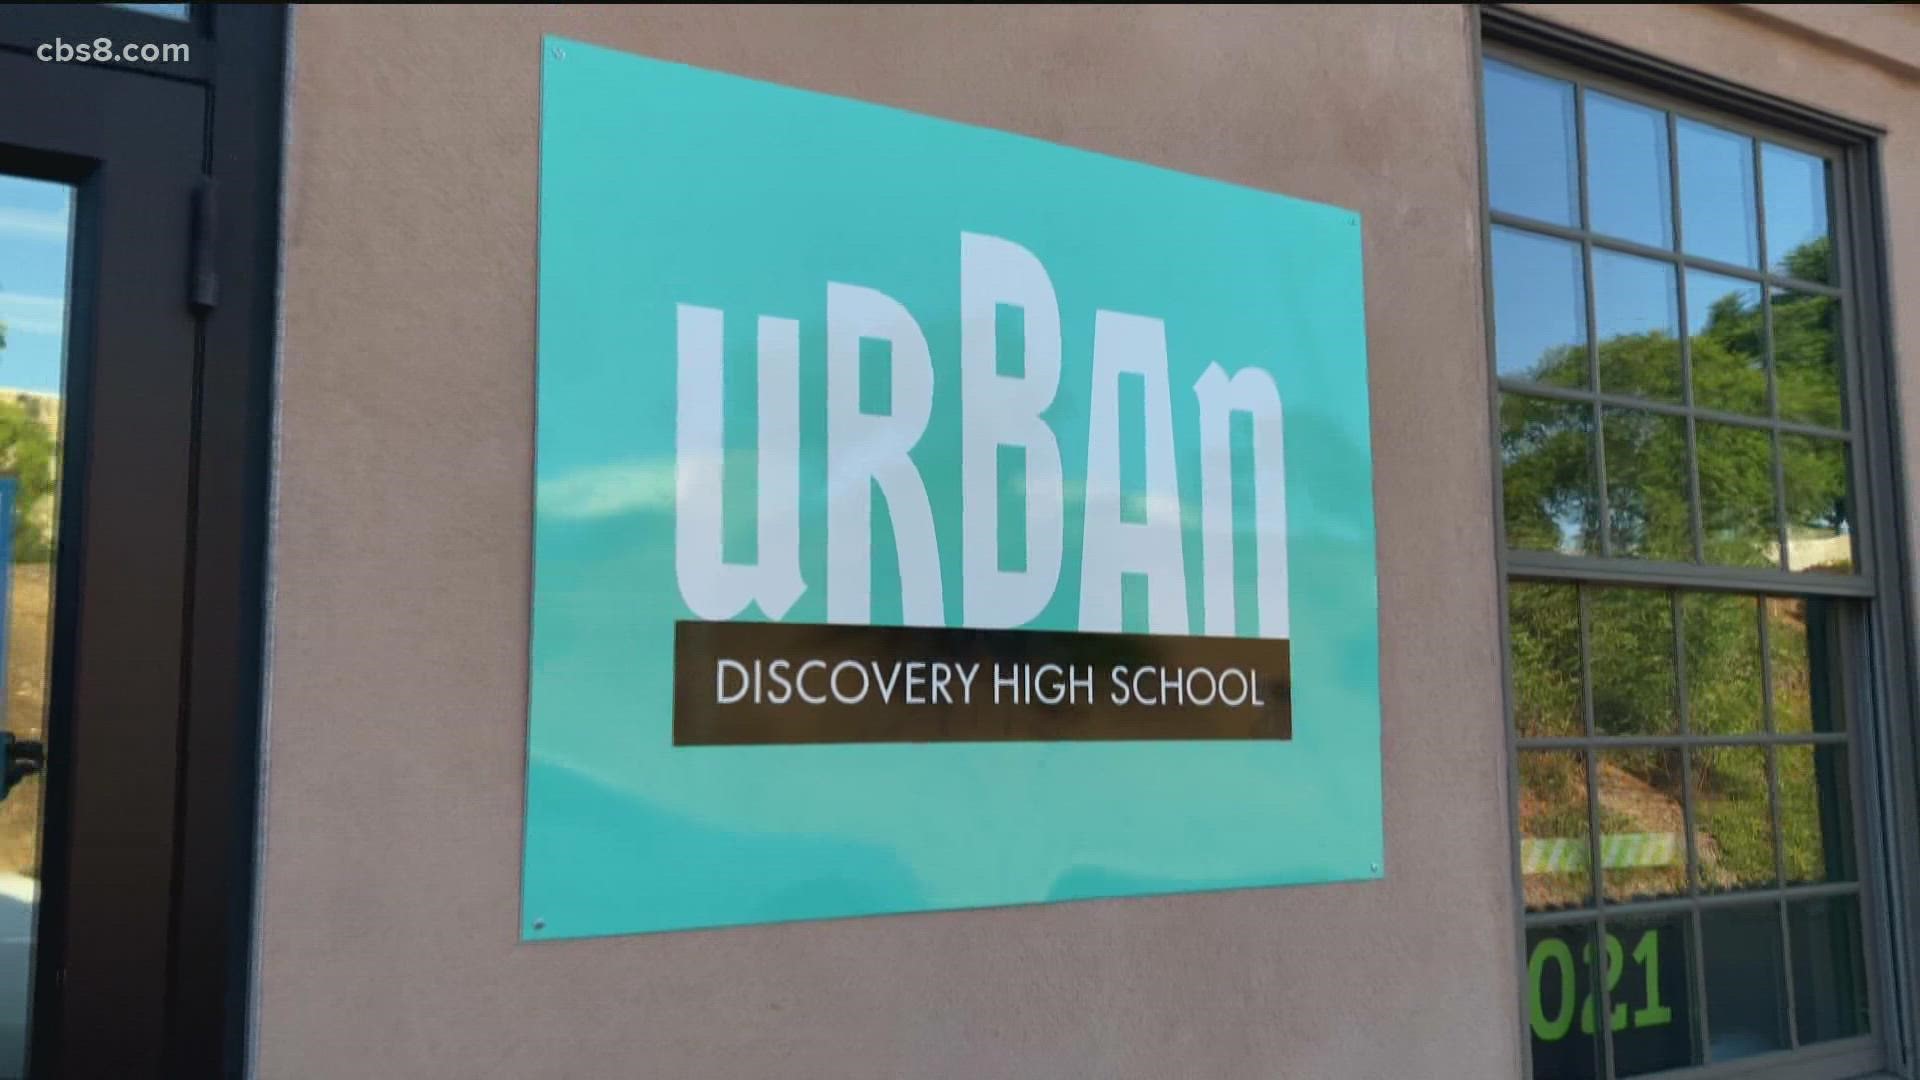 While a charter school system, Urban Discovery Schools will be the first public schools in San Diego County require the vaccine for eligible students.